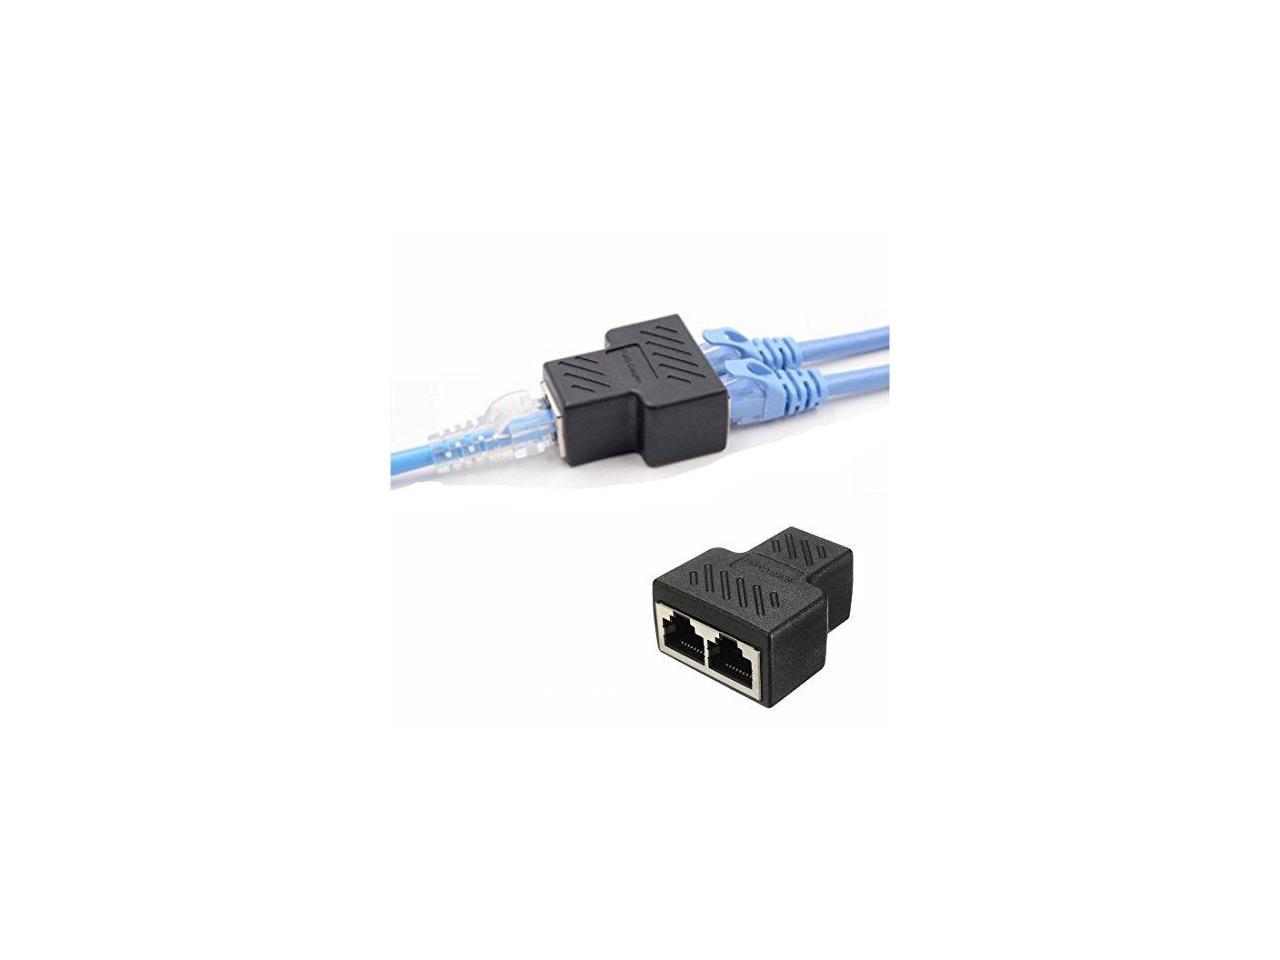 1 IN 2 OUT RJ45 CAT 5 6 LAN Ethernet Splitter Connector Adapter for PC 5 Packs 